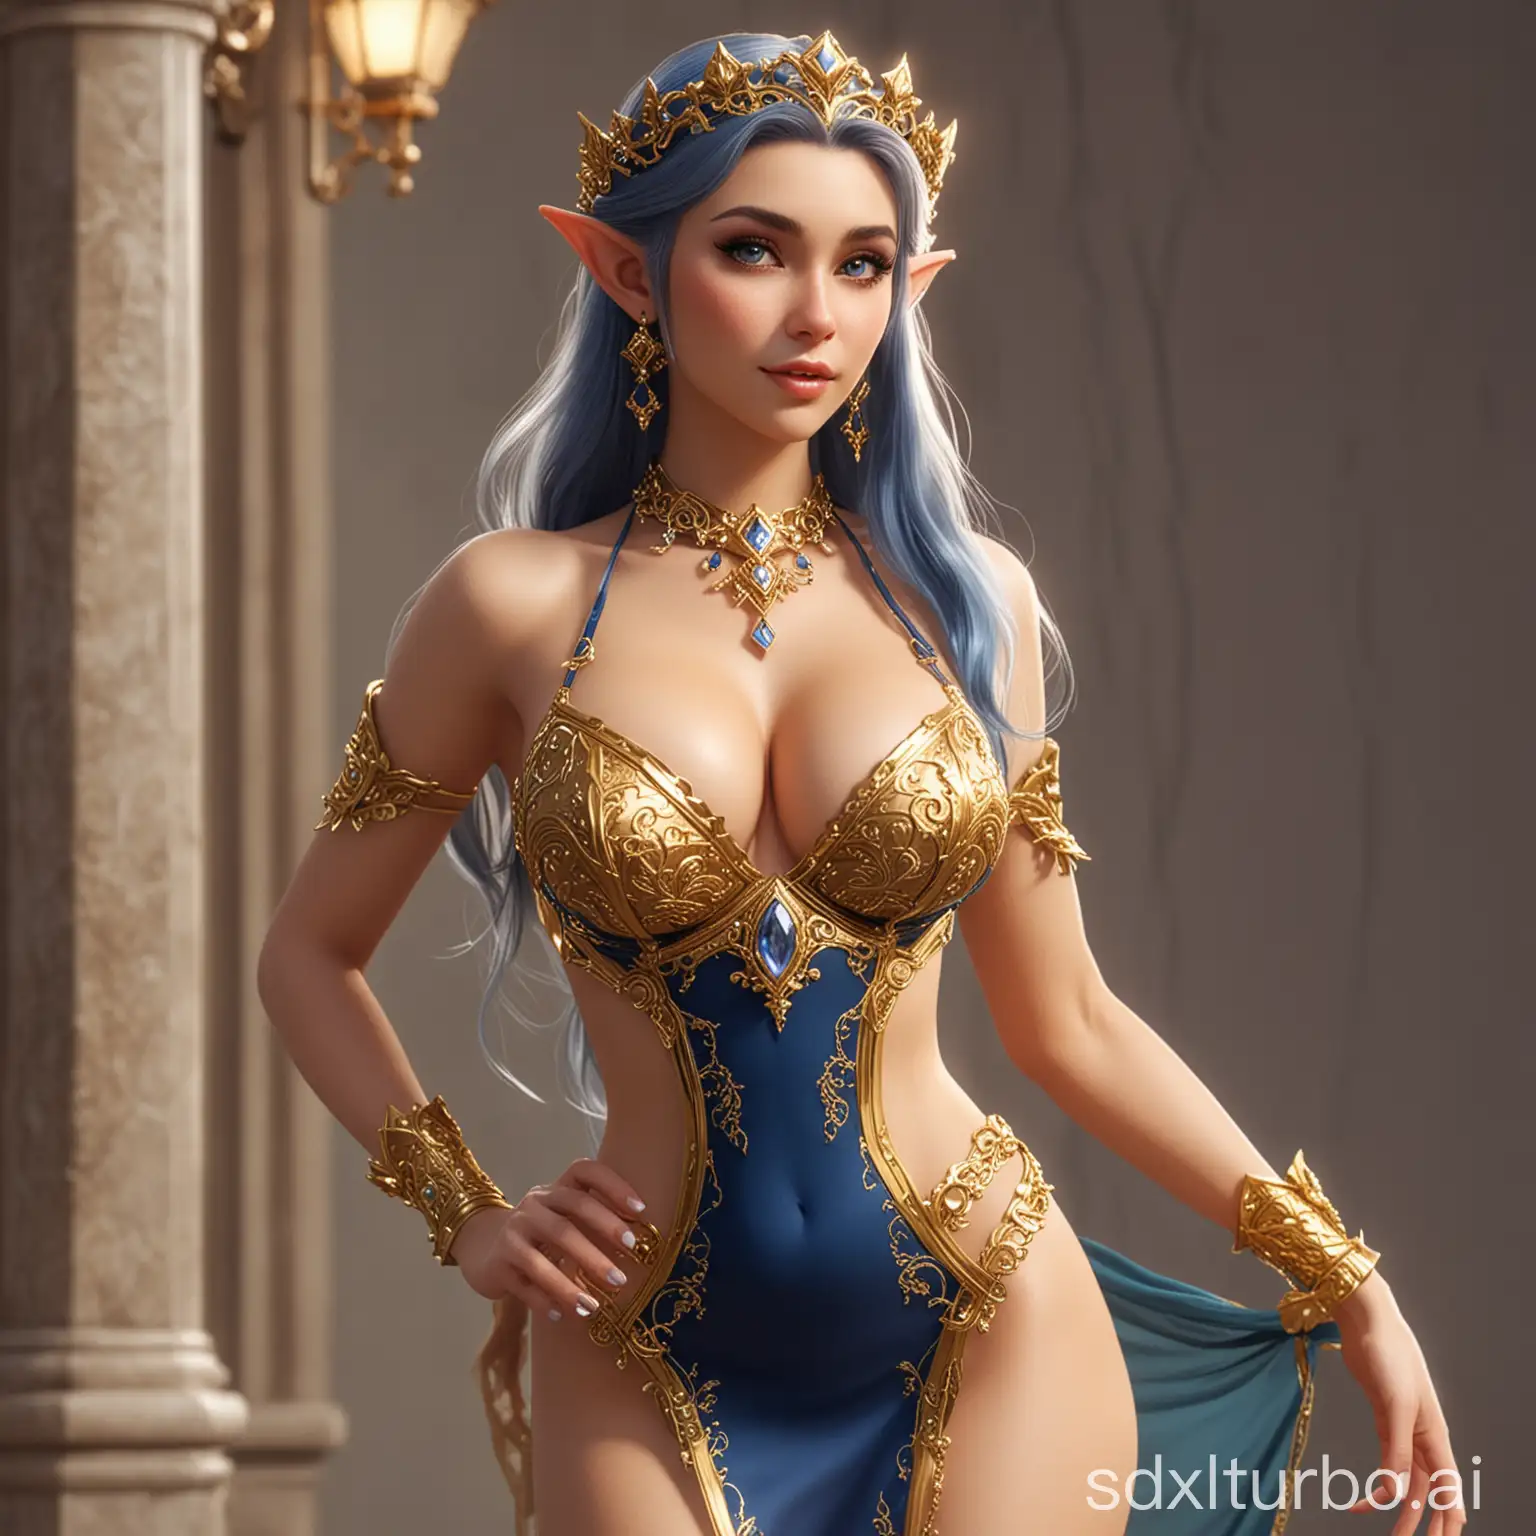 a busty elf princess wearing a gold jewellery lingerie sapphire voxel dress